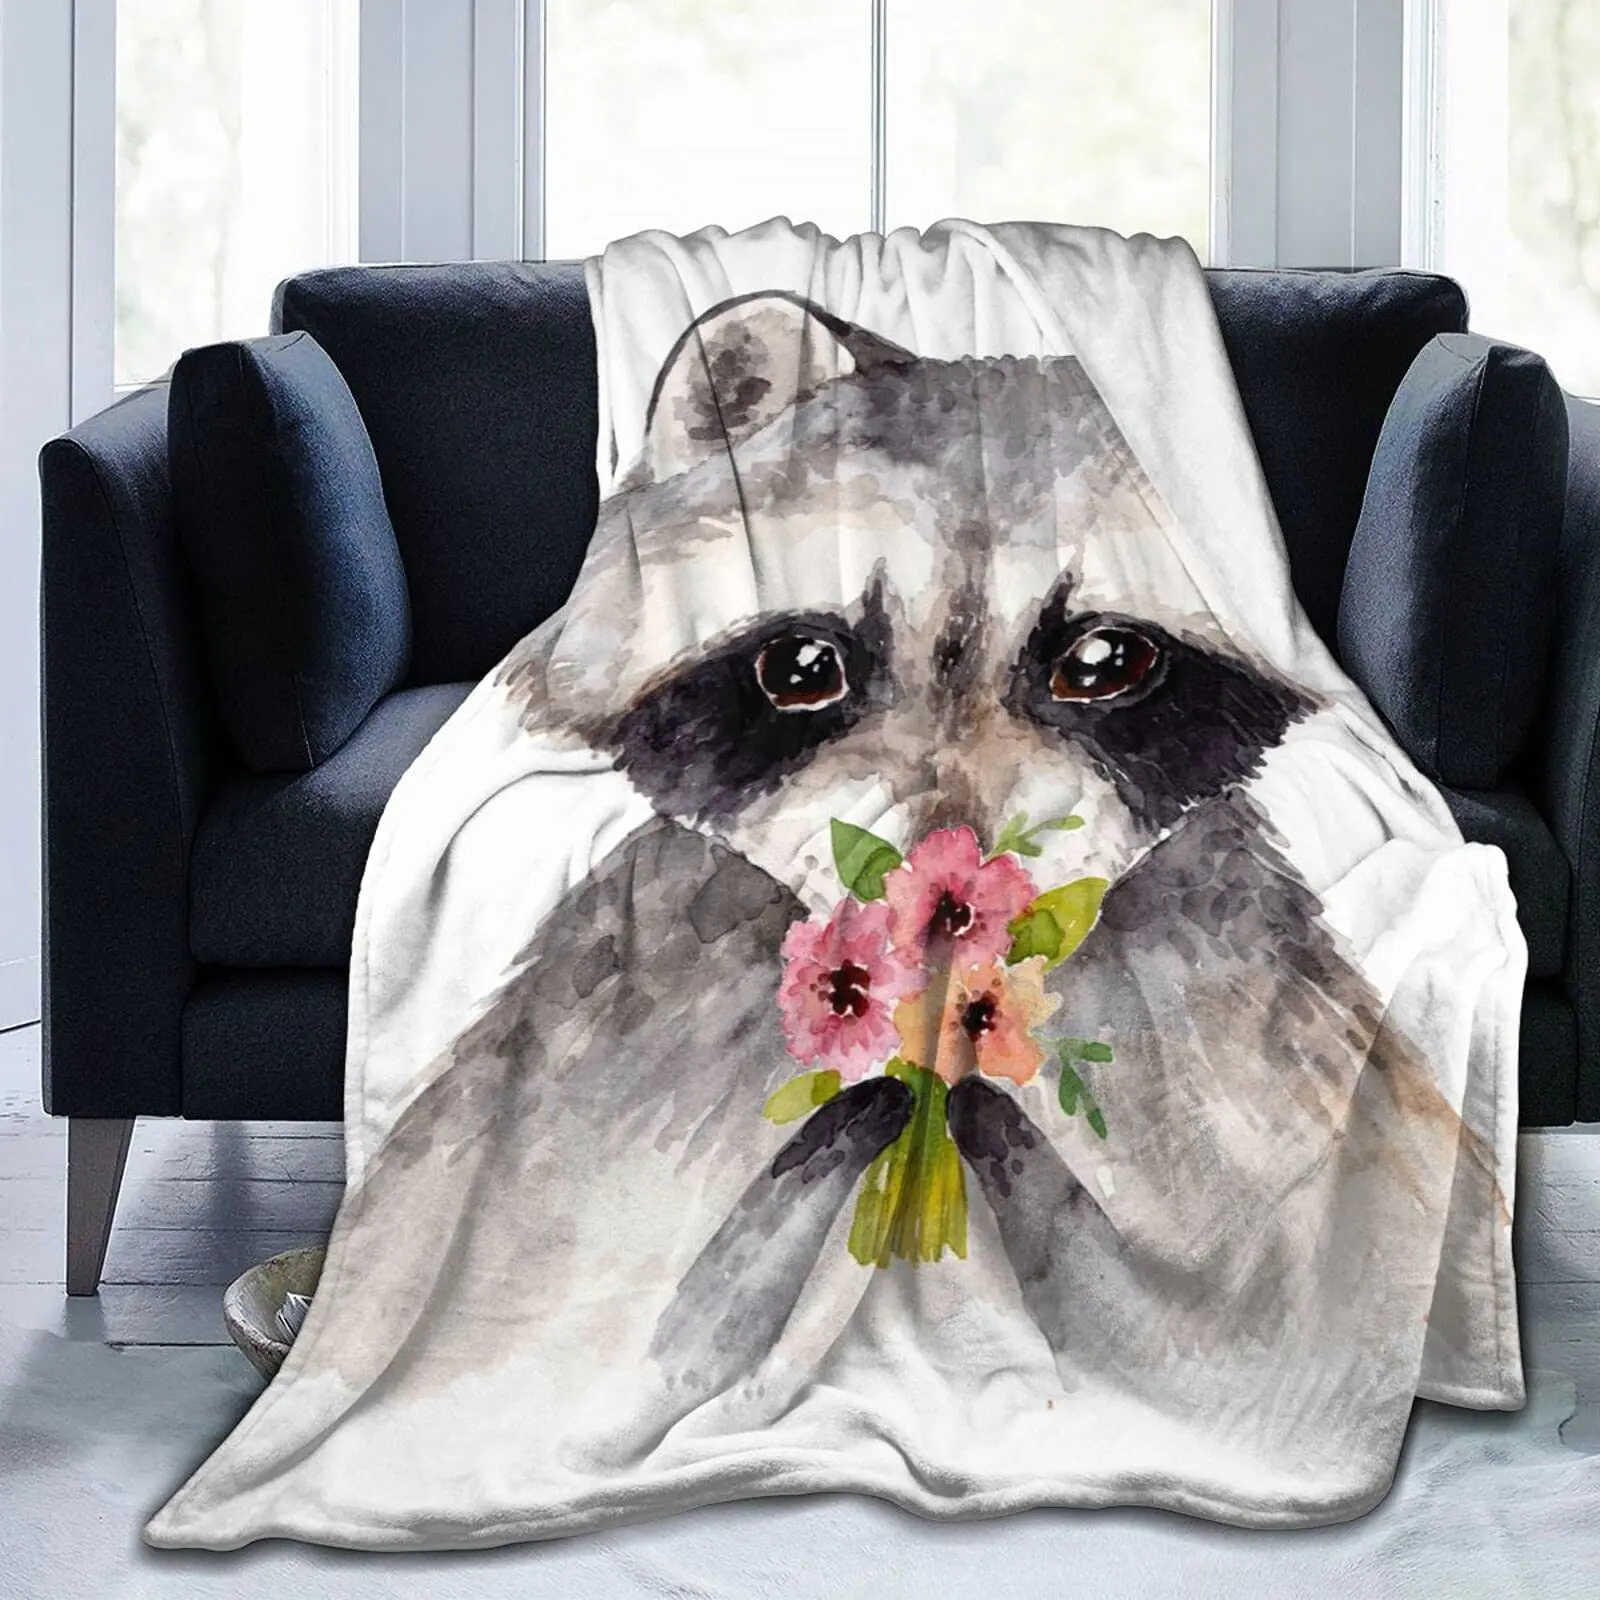 

Raccoon and Flowers Soft Throw Blanket All Season Microplush Warm Blankets Lightweight Fuzzy Flannel Blanket for Bed Sofa Couch